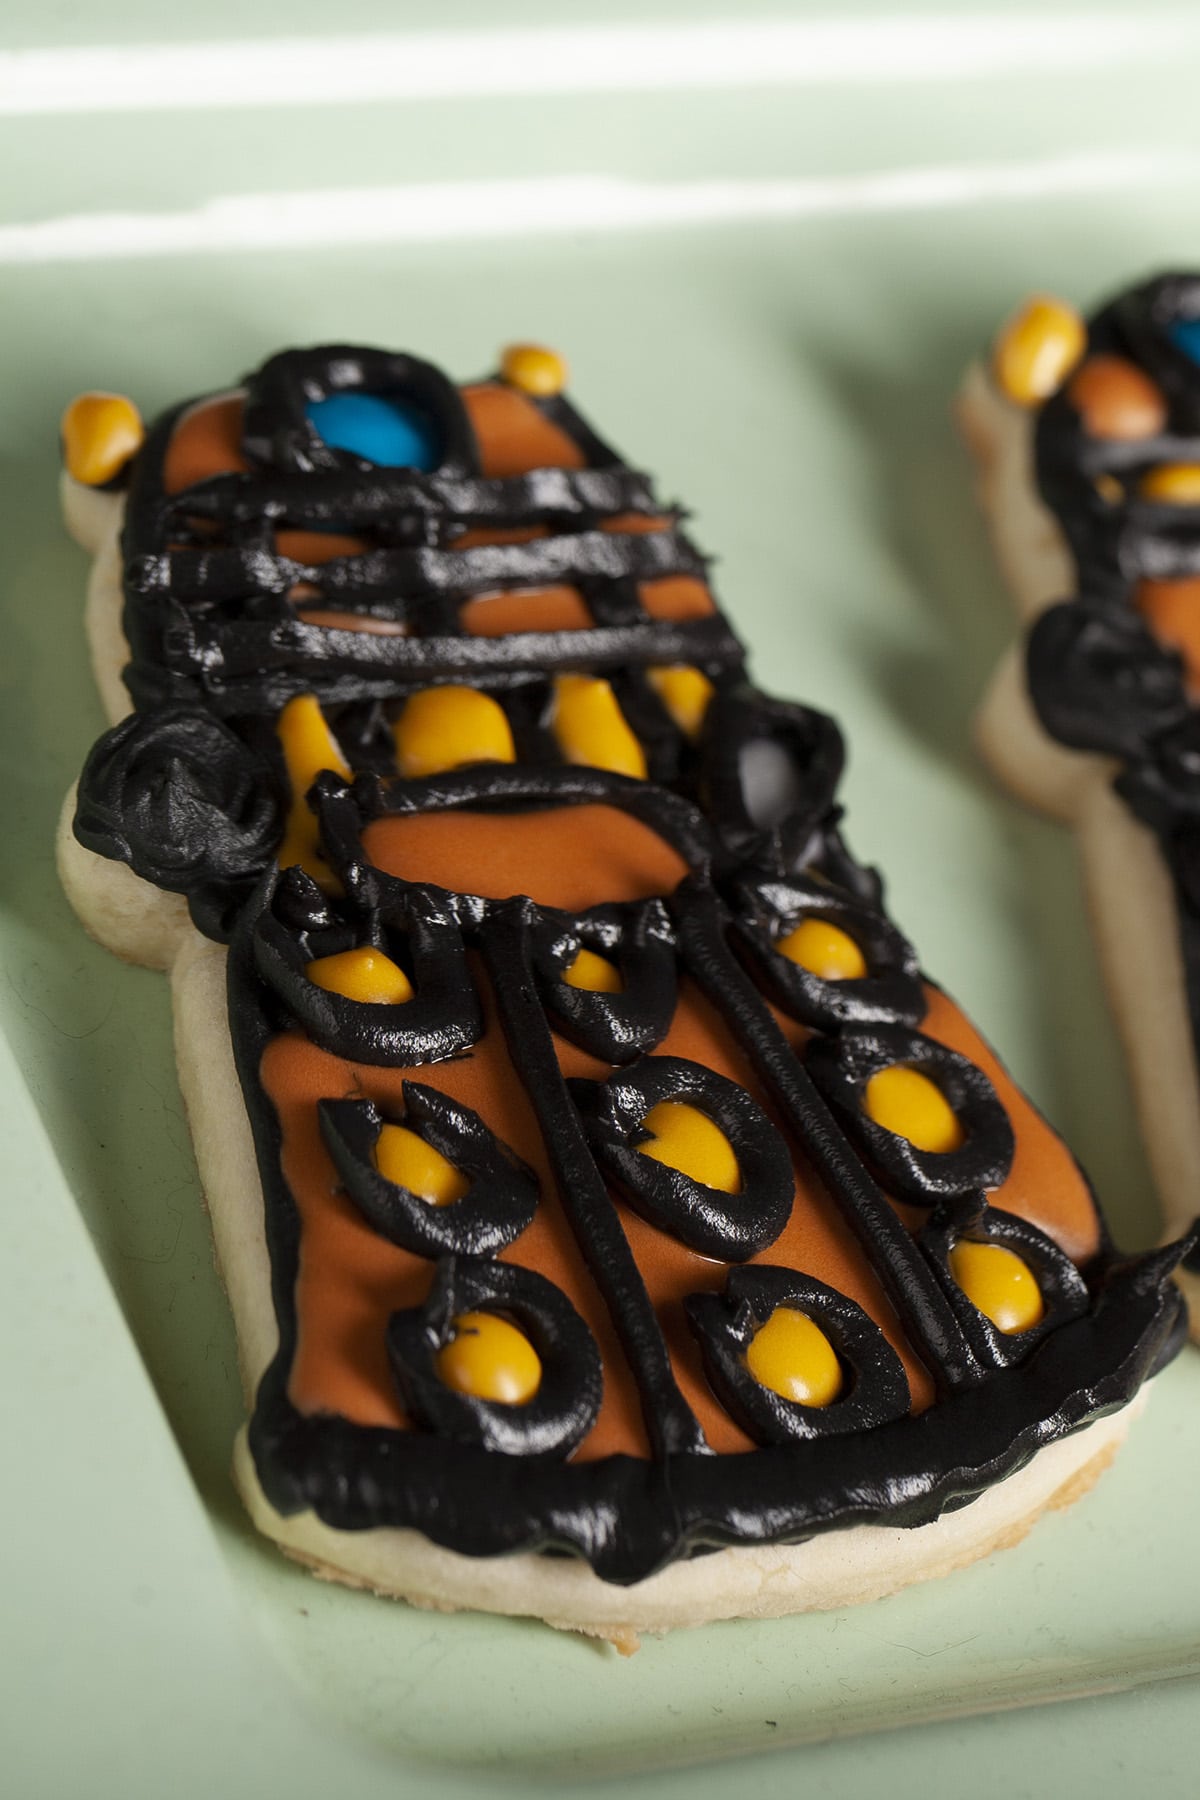 3 decorated Dalek sugar cookies on a light green plate.